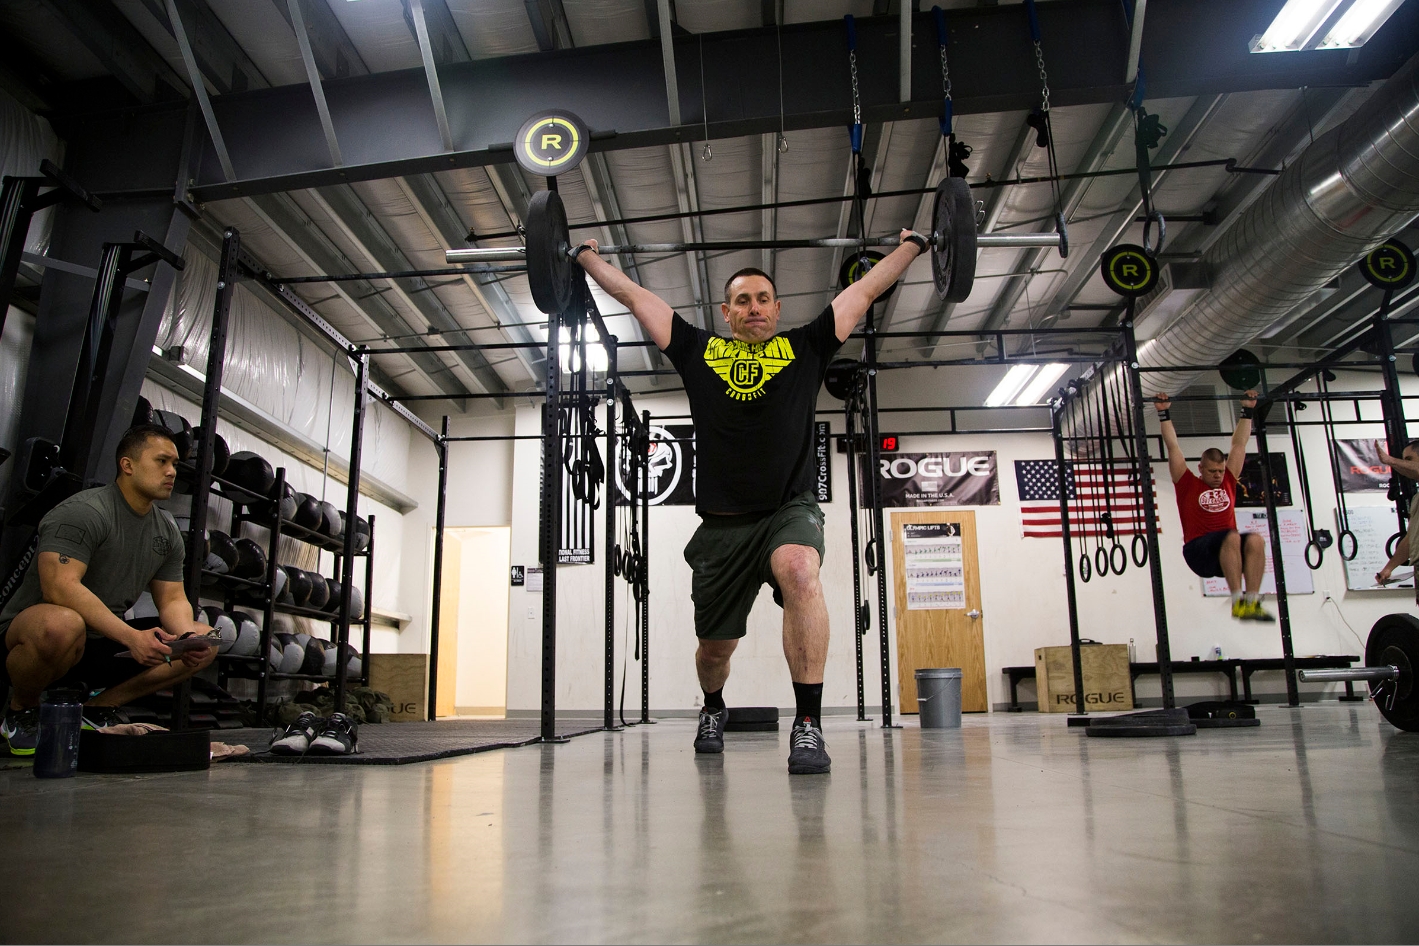 907 CrossFit Competes in the Open